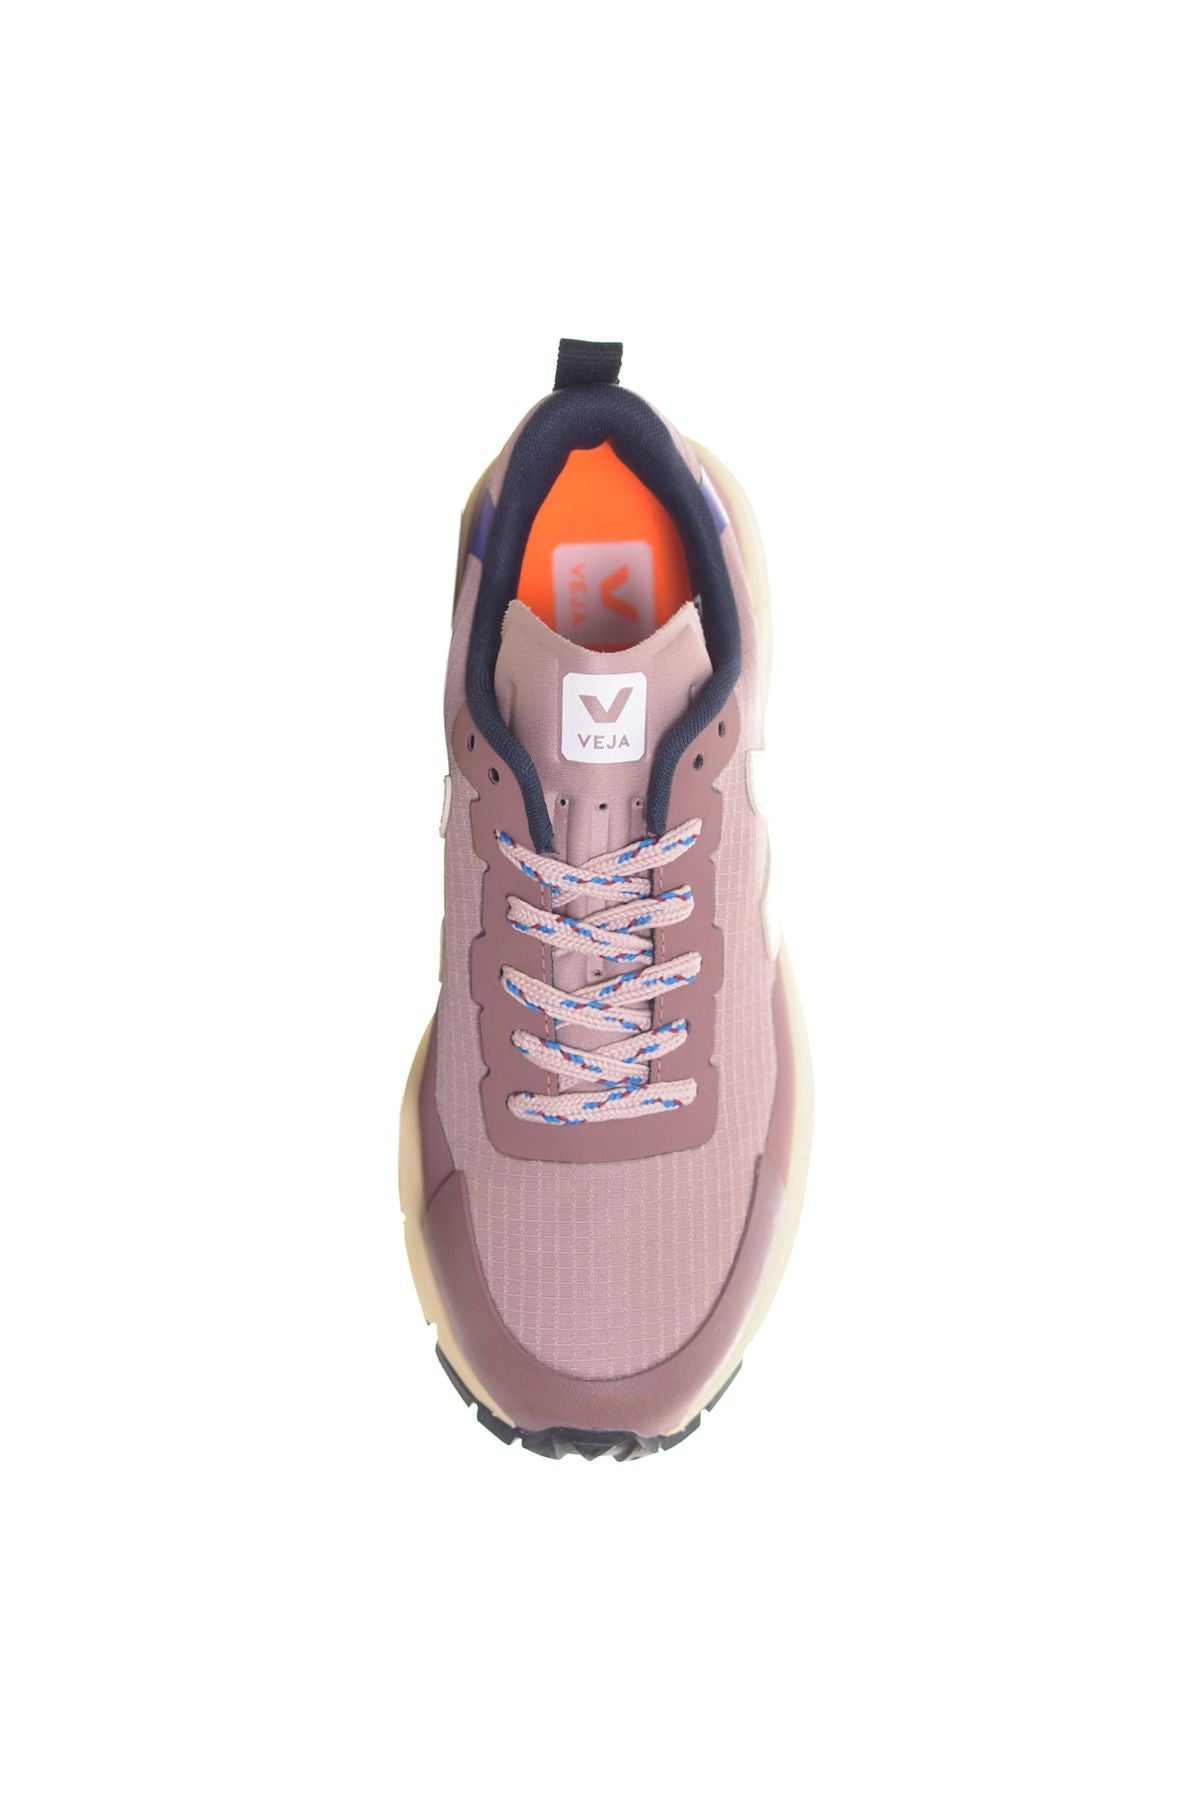 VEJA Sneakers Autunno/Inverno Poliestere